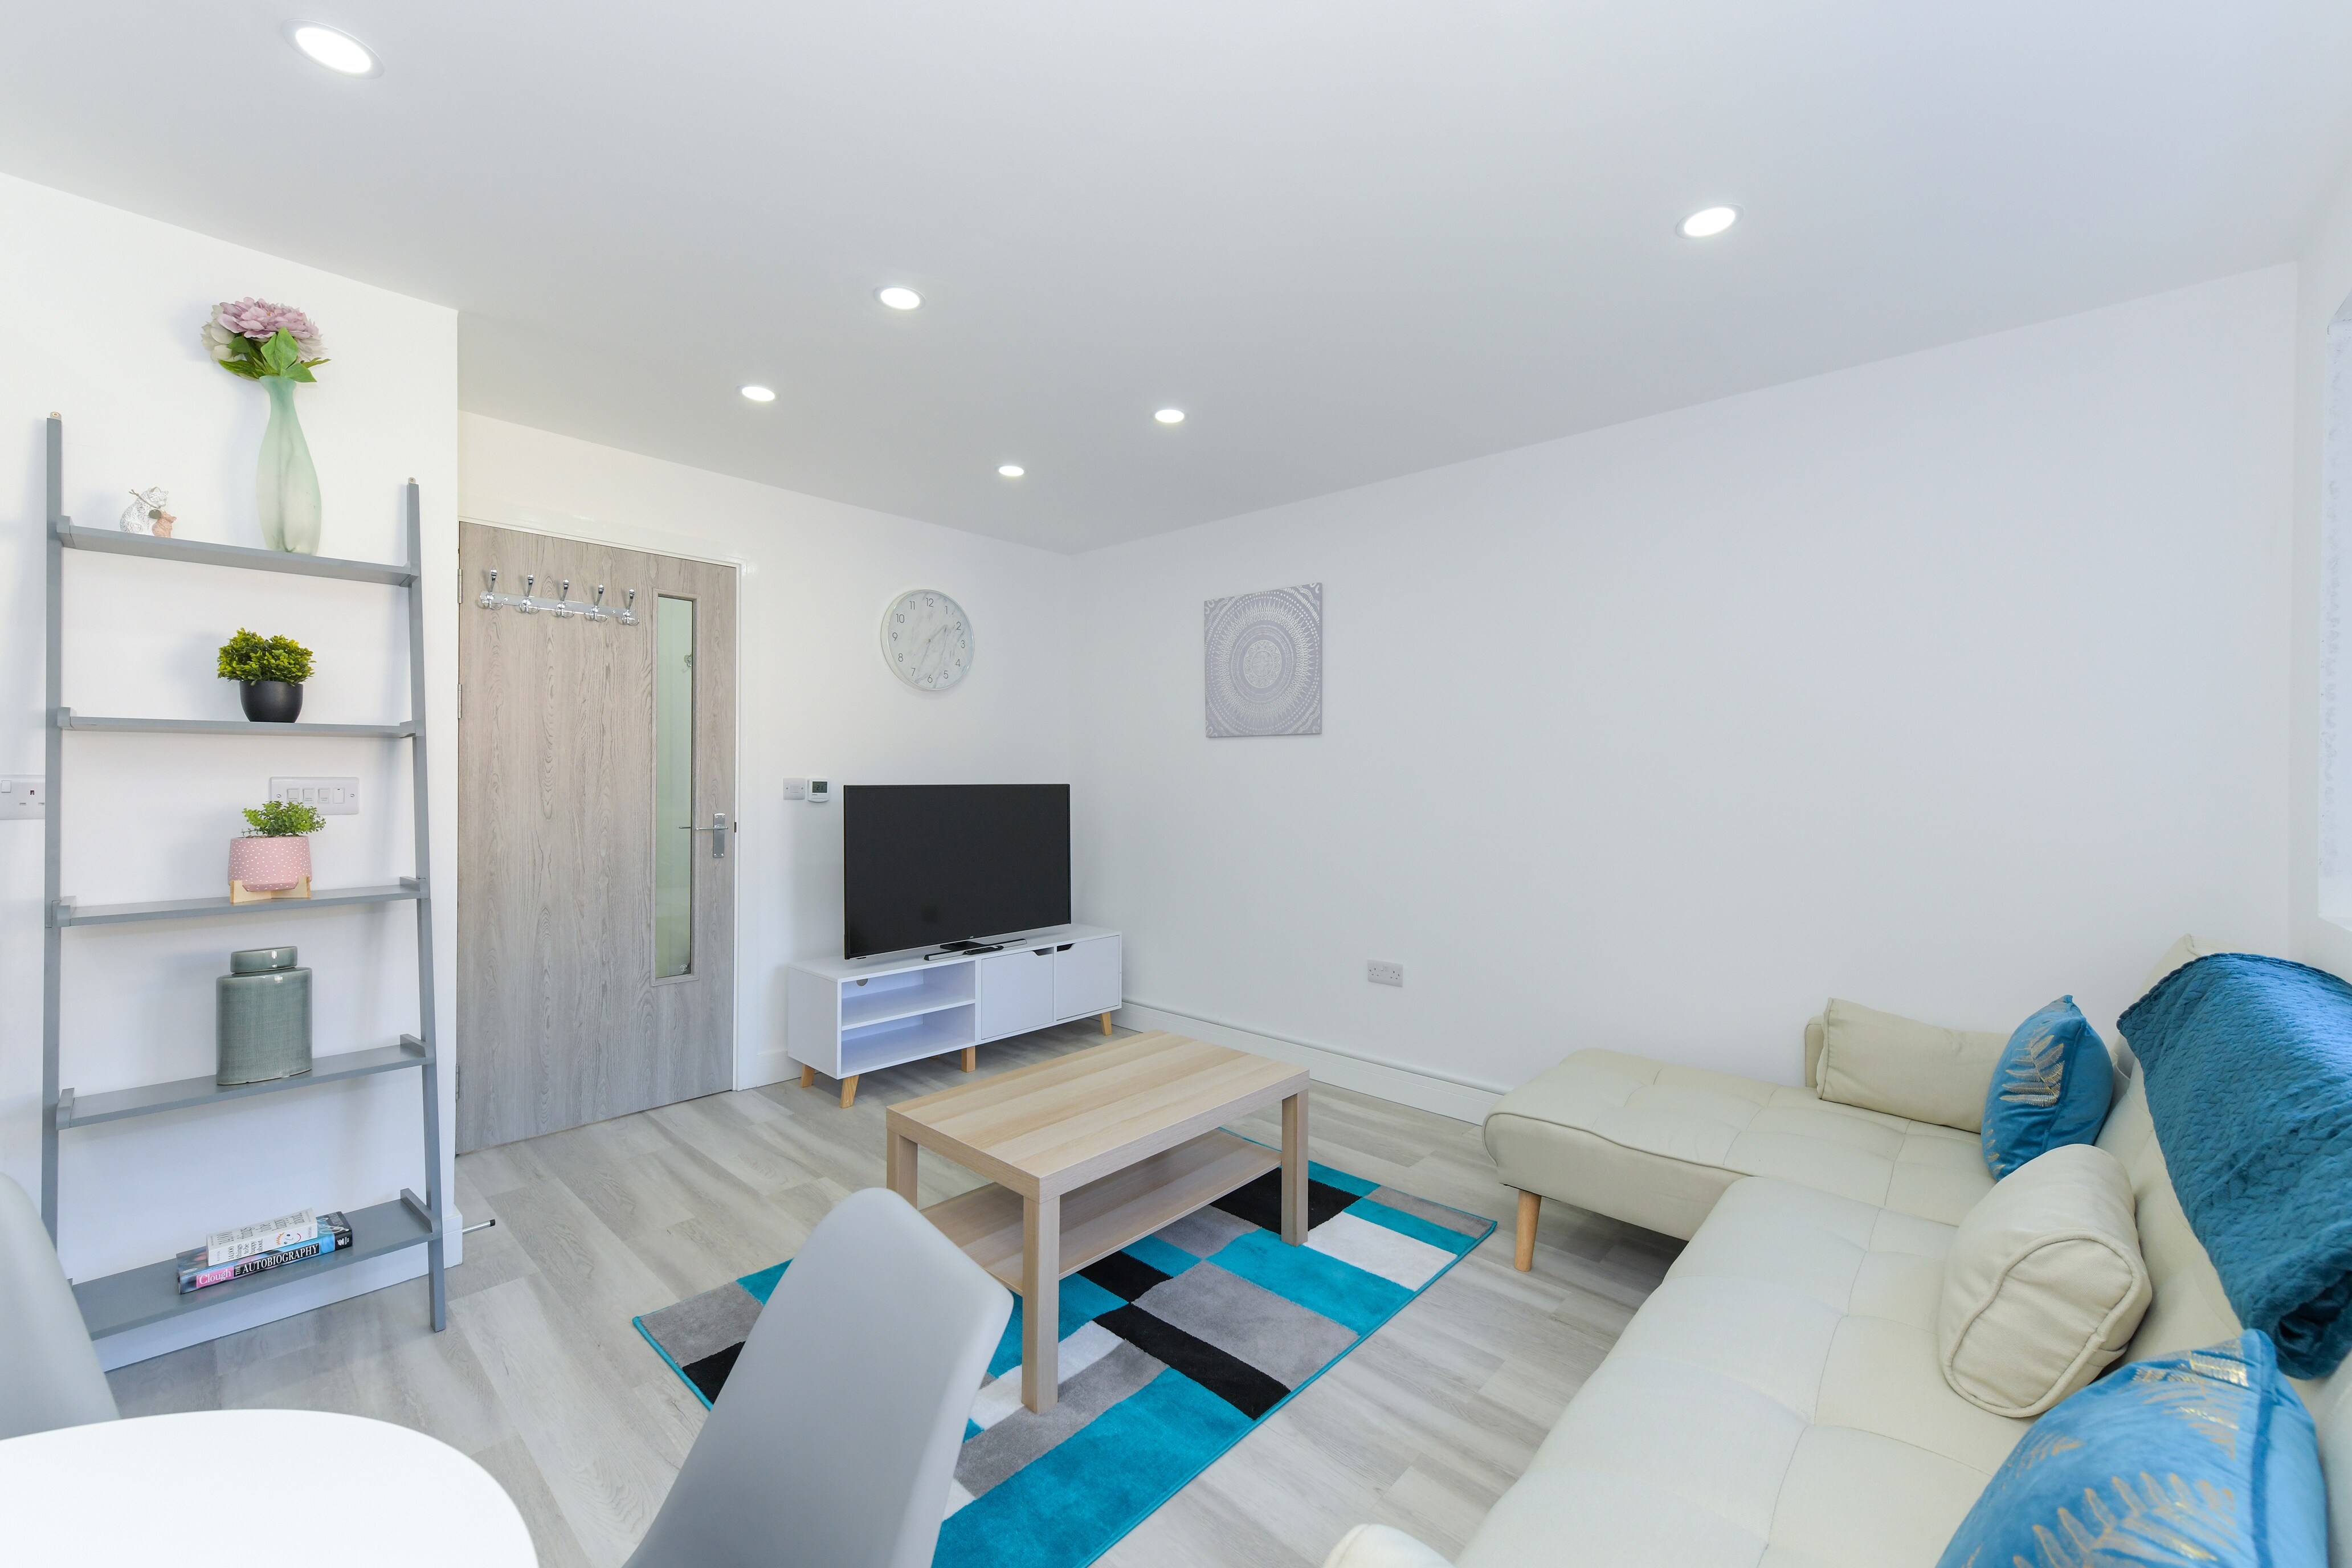 Property Image 1 - Stylish 2bed City Home, Low Carbon, Parking